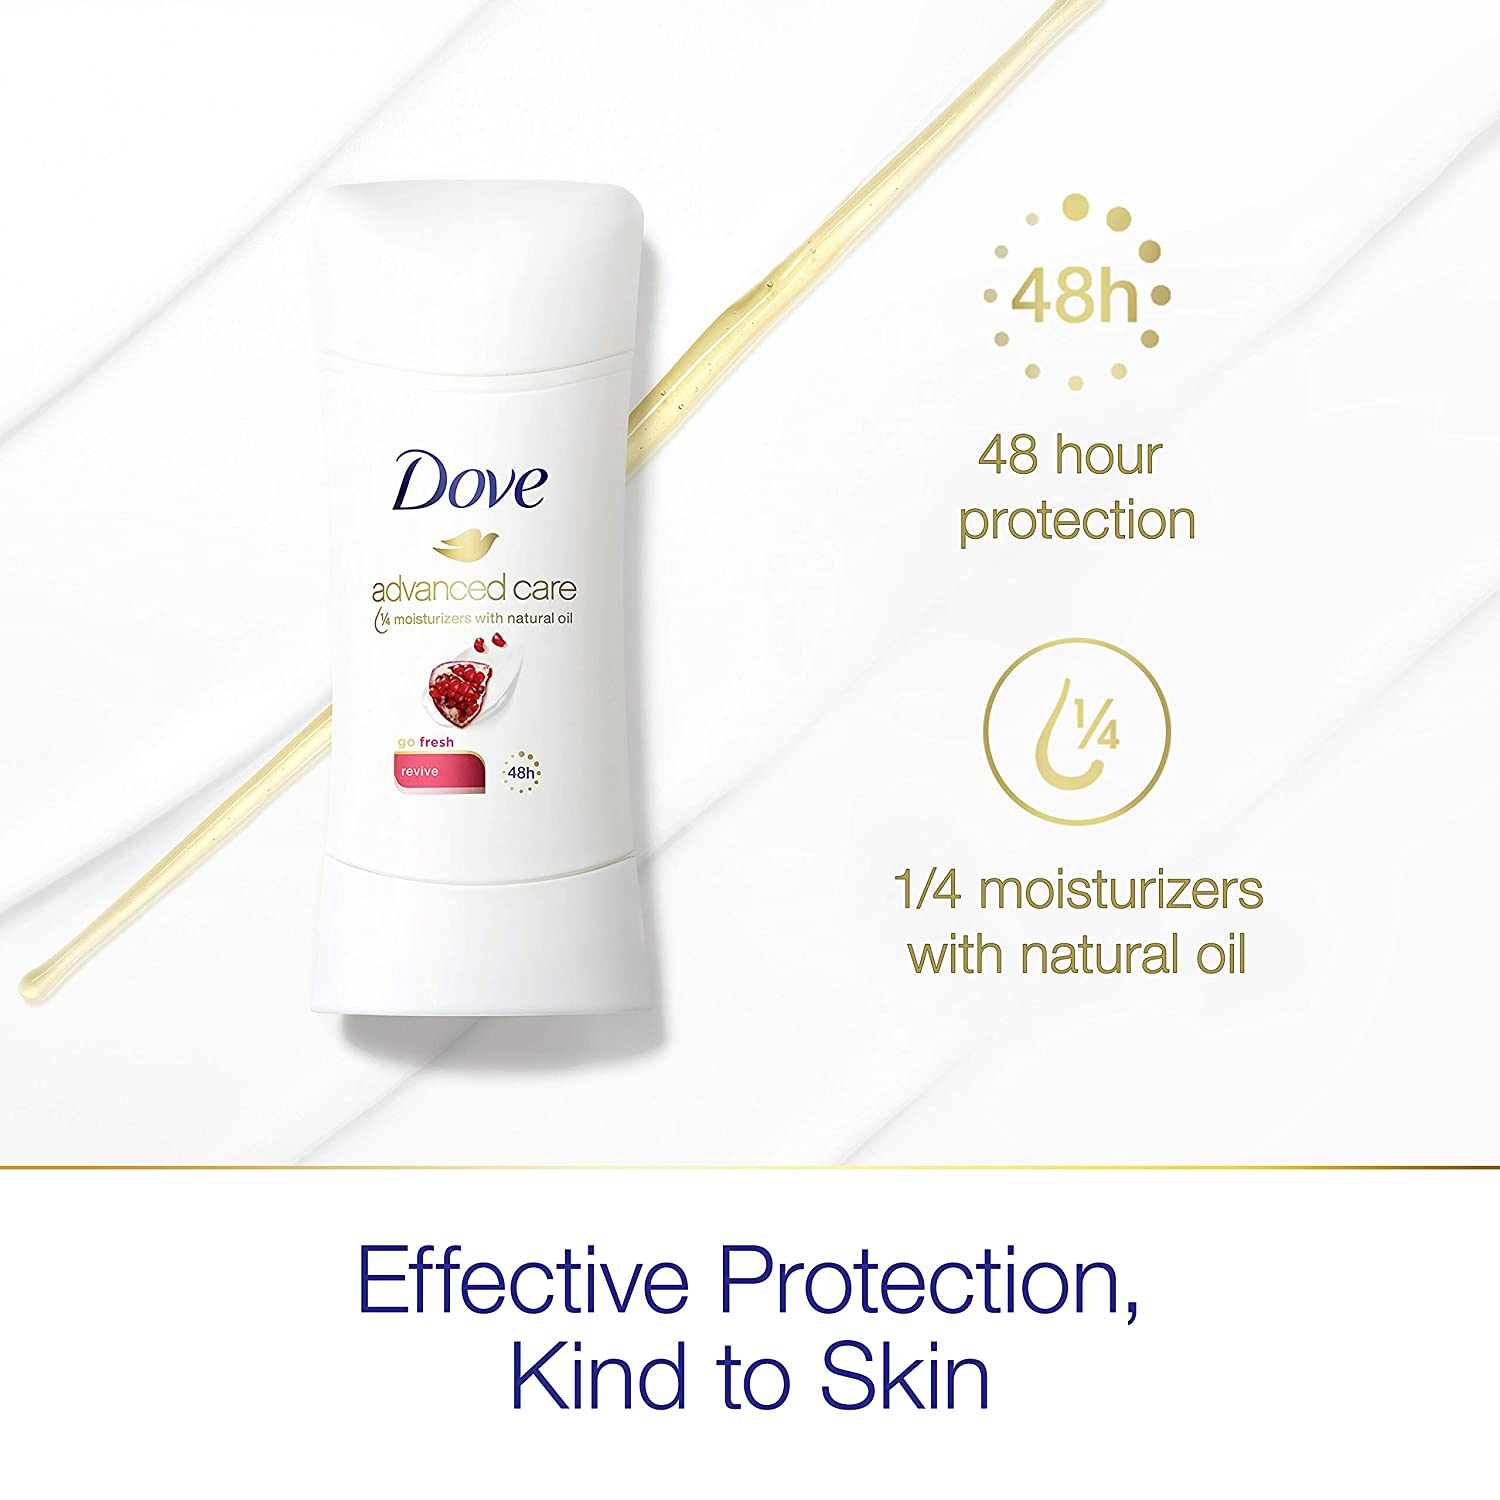 Dove Advanced Care Antiperspirant Deodorant Stick for Women, Revive, for 48 Hour Protection And Soft And Comfortable Underarms, 2.6 oz, 2 Count - image 3 of 6